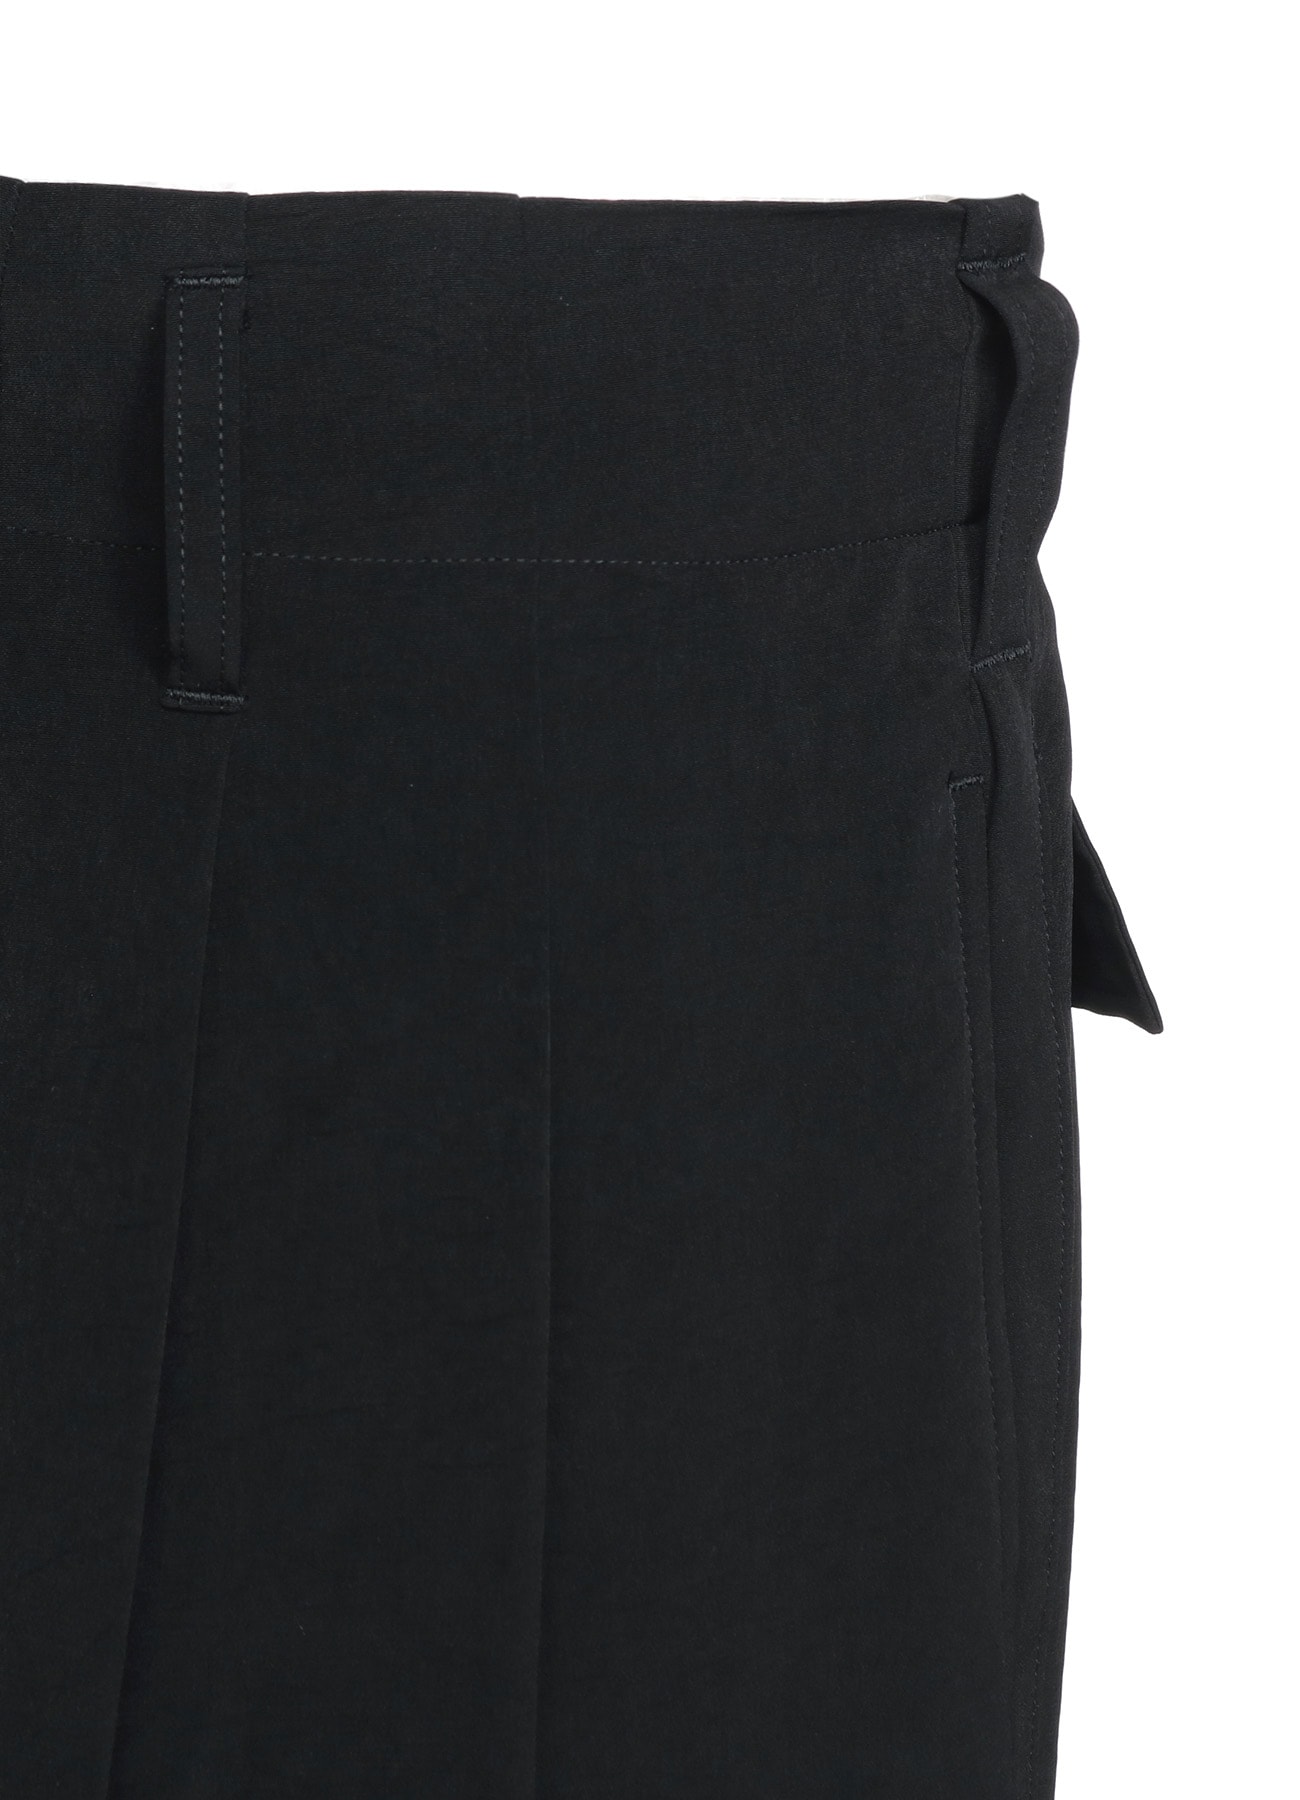 CREPE DE CHINE 3-PLEATED WIDE TROUSERS WITH SIDE STRIPES(S Black 